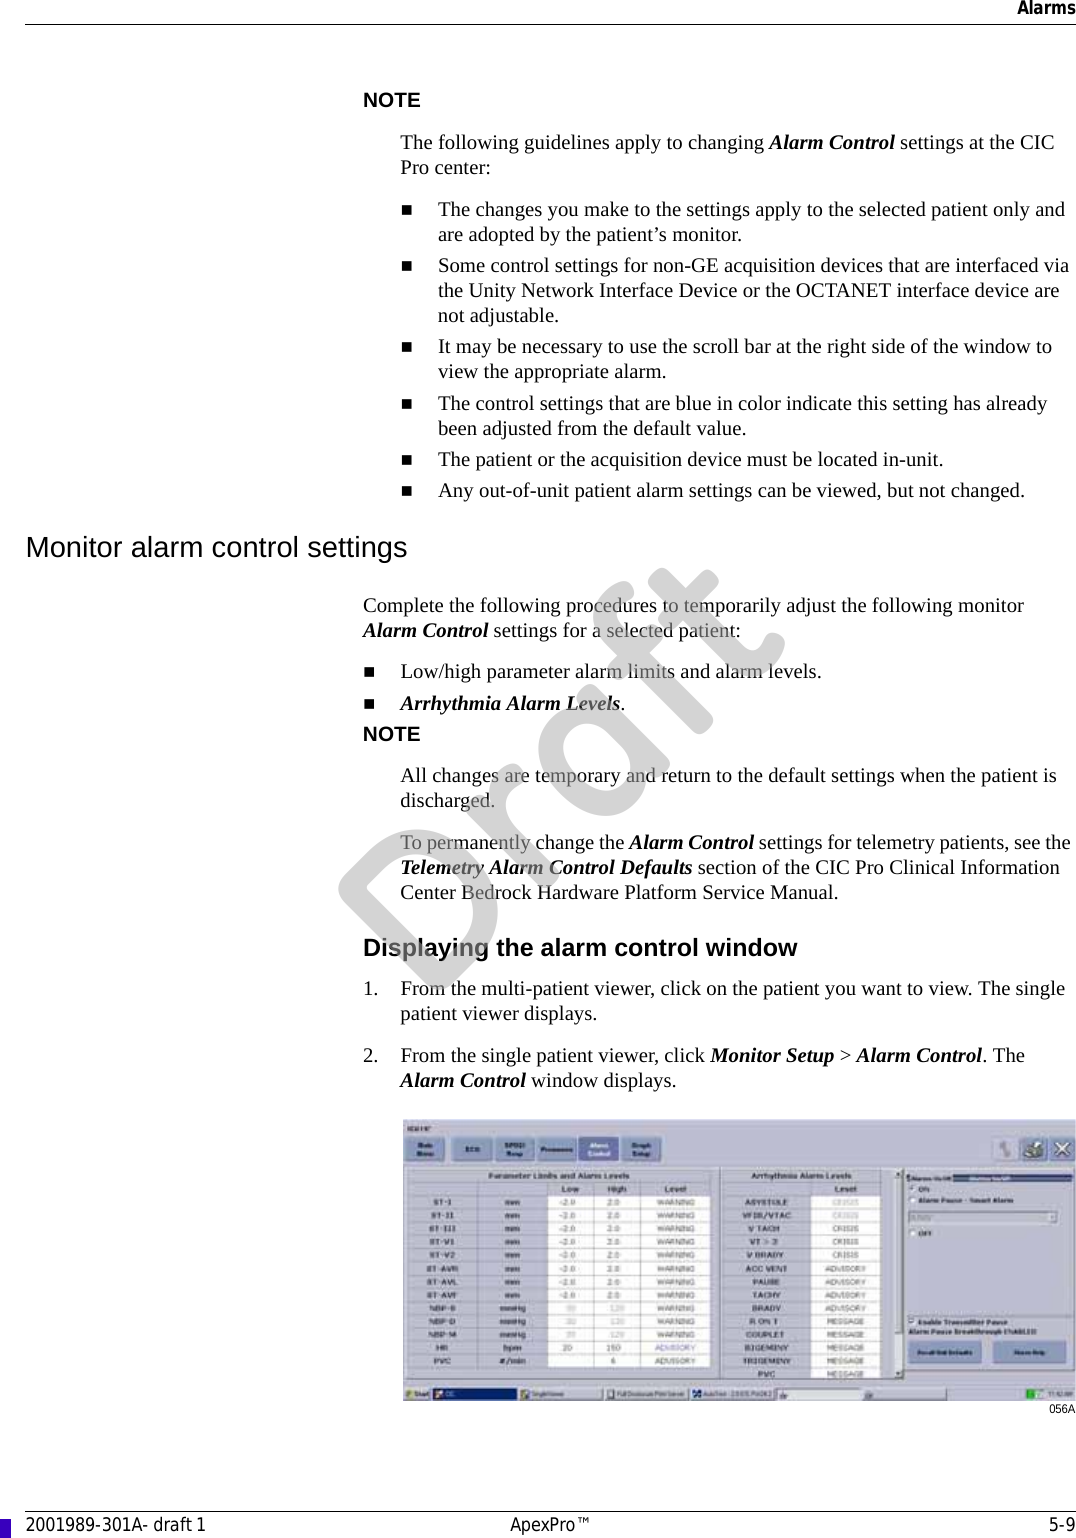 Alarms2001989-301A- draft 1 ApexPro™ 5-9NOTEThe following guidelines apply to changing Alarm Control settings at the CIC Pro center: The changes you make to the settings apply to the selected patient only and are adopted by the patient’s monitor.Some control settings for non-GE acquisition devices that are interfaced via the Unity Network Interface Device or the OCTANET interface device are not adjustable.It may be necessary to use the scroll bar at the right side of the window to view the appropriate alarm.The control settings that are blue in color indicate this setting has already been adjusted from the default value.The patient or the acquisition device must be located in-unit. Any out-of-unit patient alarm settings can be viewed, but not changed.Monitor alarm control settingsComplete the following procedures to temporarily adjust the following monitor Alarm Control settings for a selected patient:Low/high parameter alarm limits and alarm levels.Arrhythmia Alarm Levels.NOTEAll changes are temporary and return to the default settings when the patient is discharged. To permanently change the Alarm Control settings for telemetry patients, see the Telemetry Alarm Control Defaults section of the CIC Pro Clinical Information Center Bedrock Hardware Platform Service Manual.Displaying the alarm control window1. From the multi-patient viewer, click on the patient you want to view. The single patient viewer displays.2. From the single patient viewer, click Monitor Setup &gt; Alarm Control. The Alarm Control window displays.056ADraft